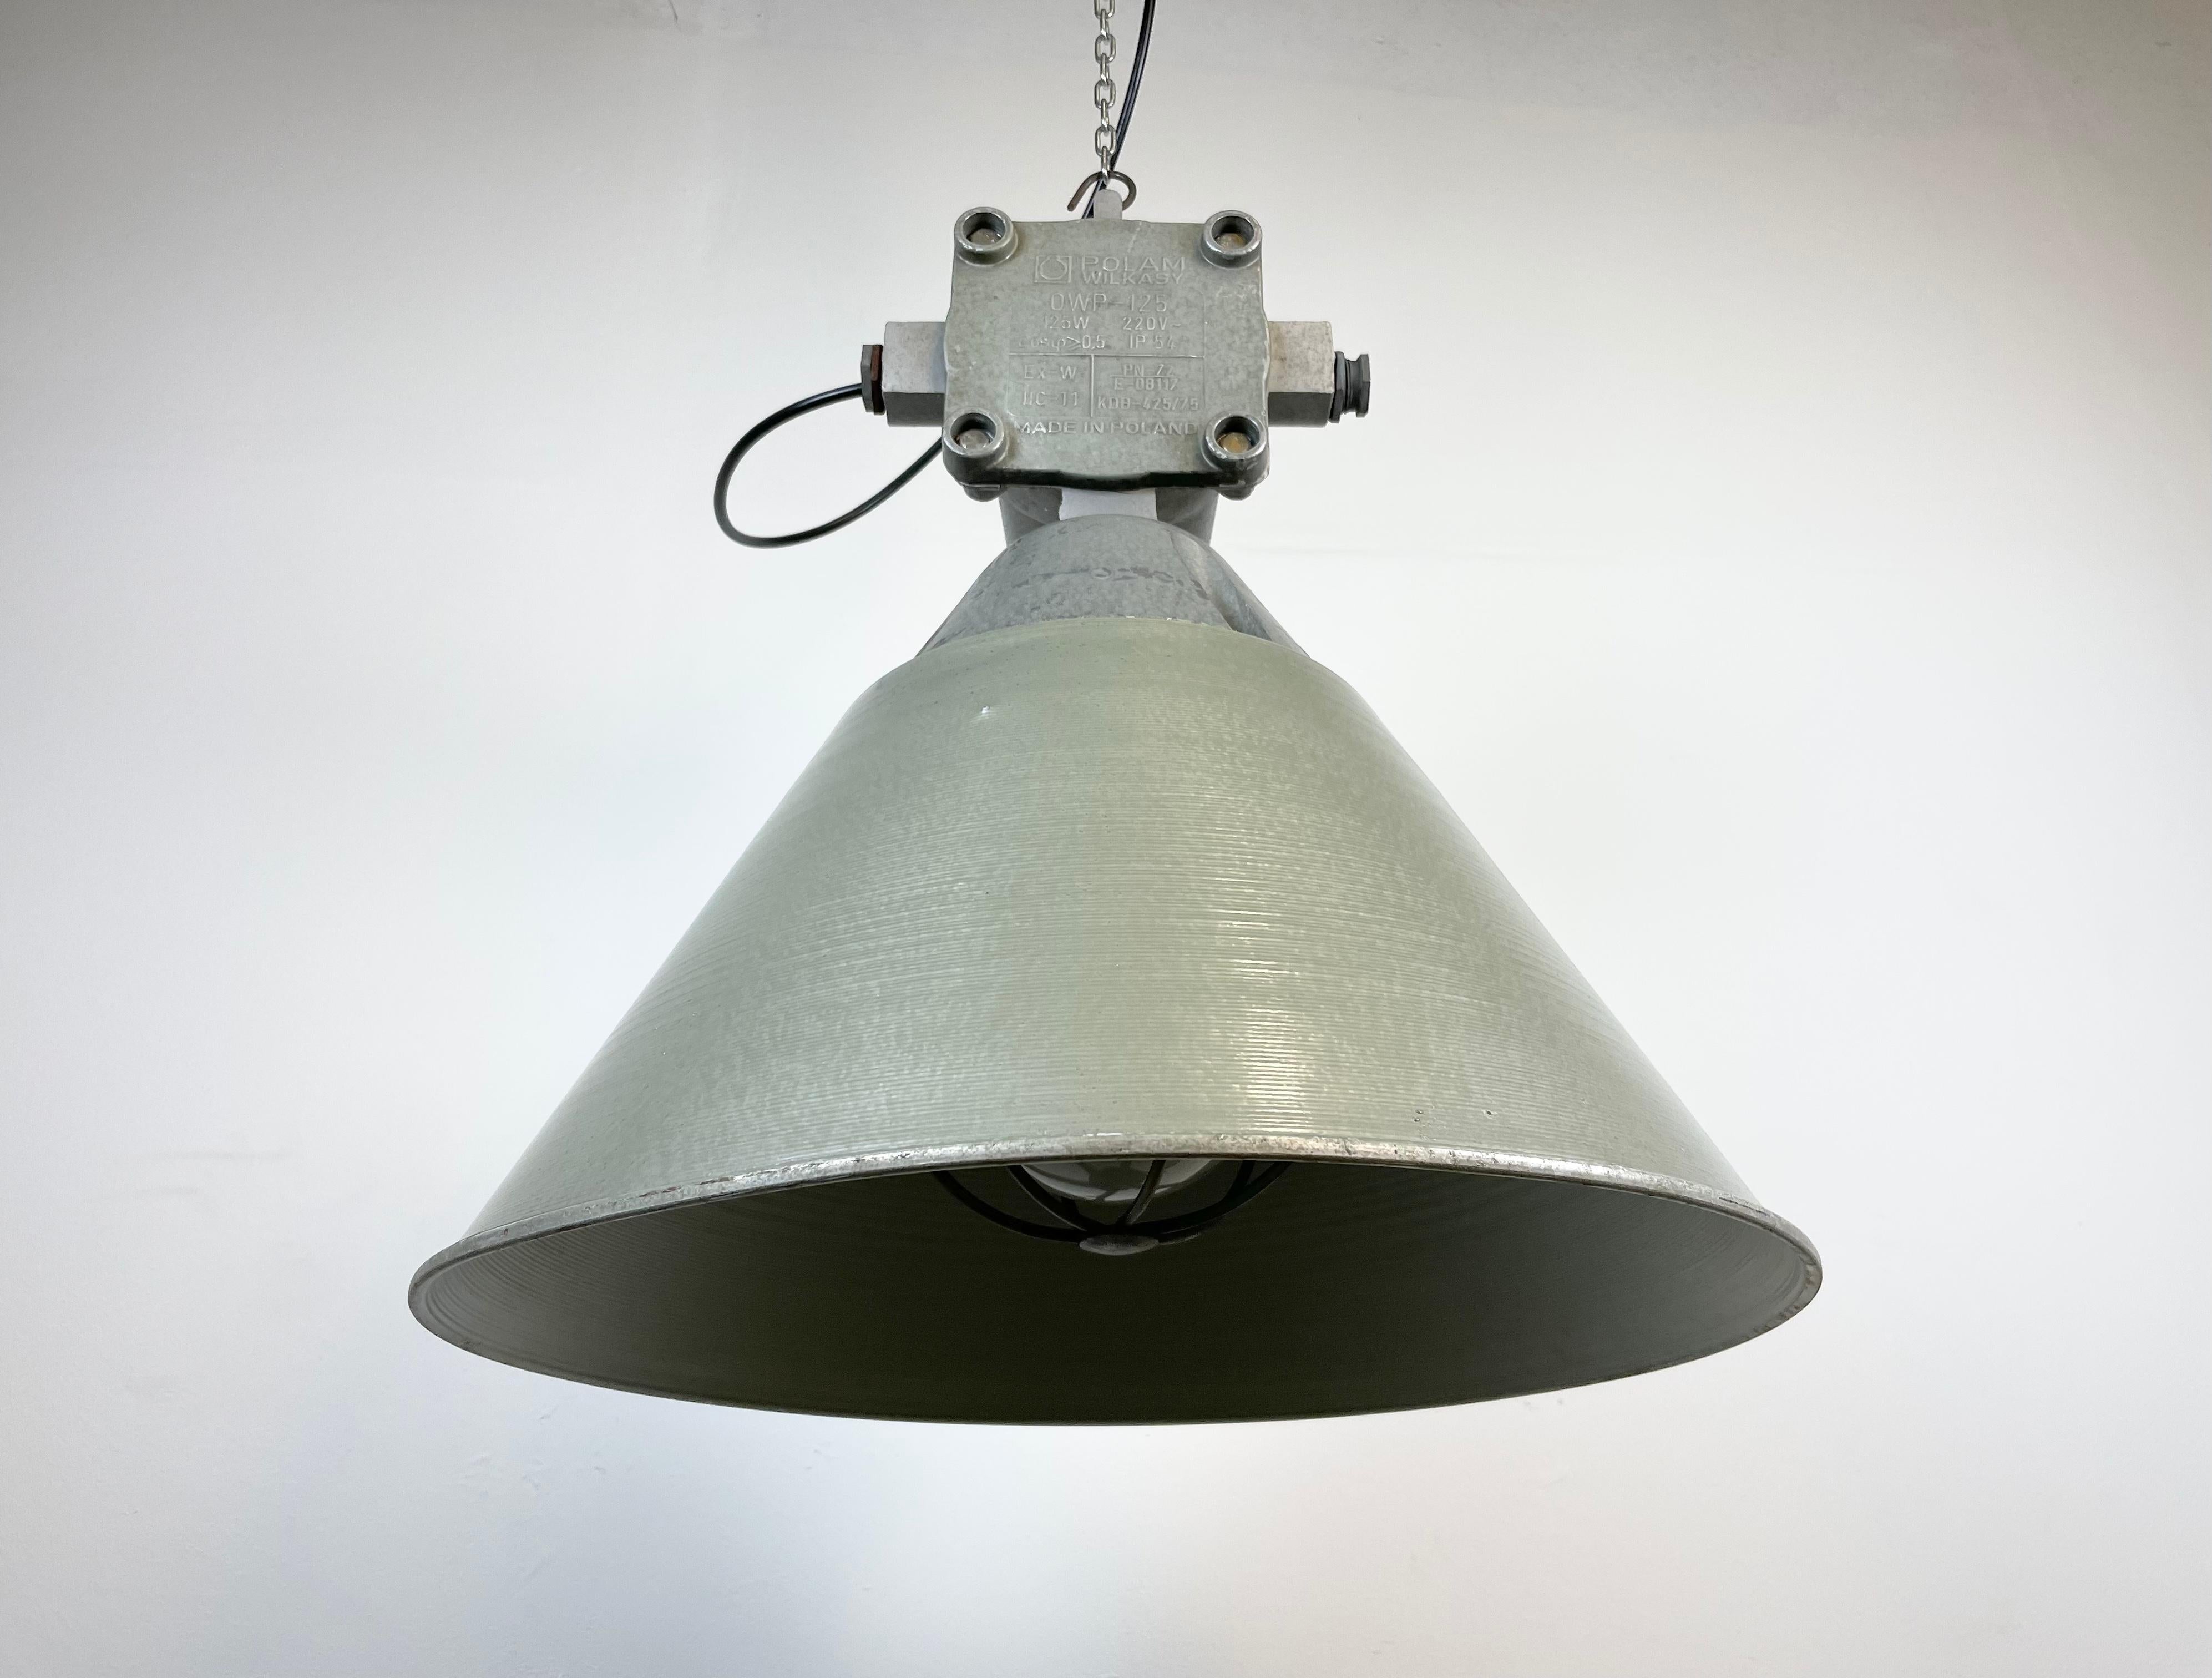 Industrial Explosion Proof Lamp with Aluminium Shade from Polam, 1970s For Sale 6